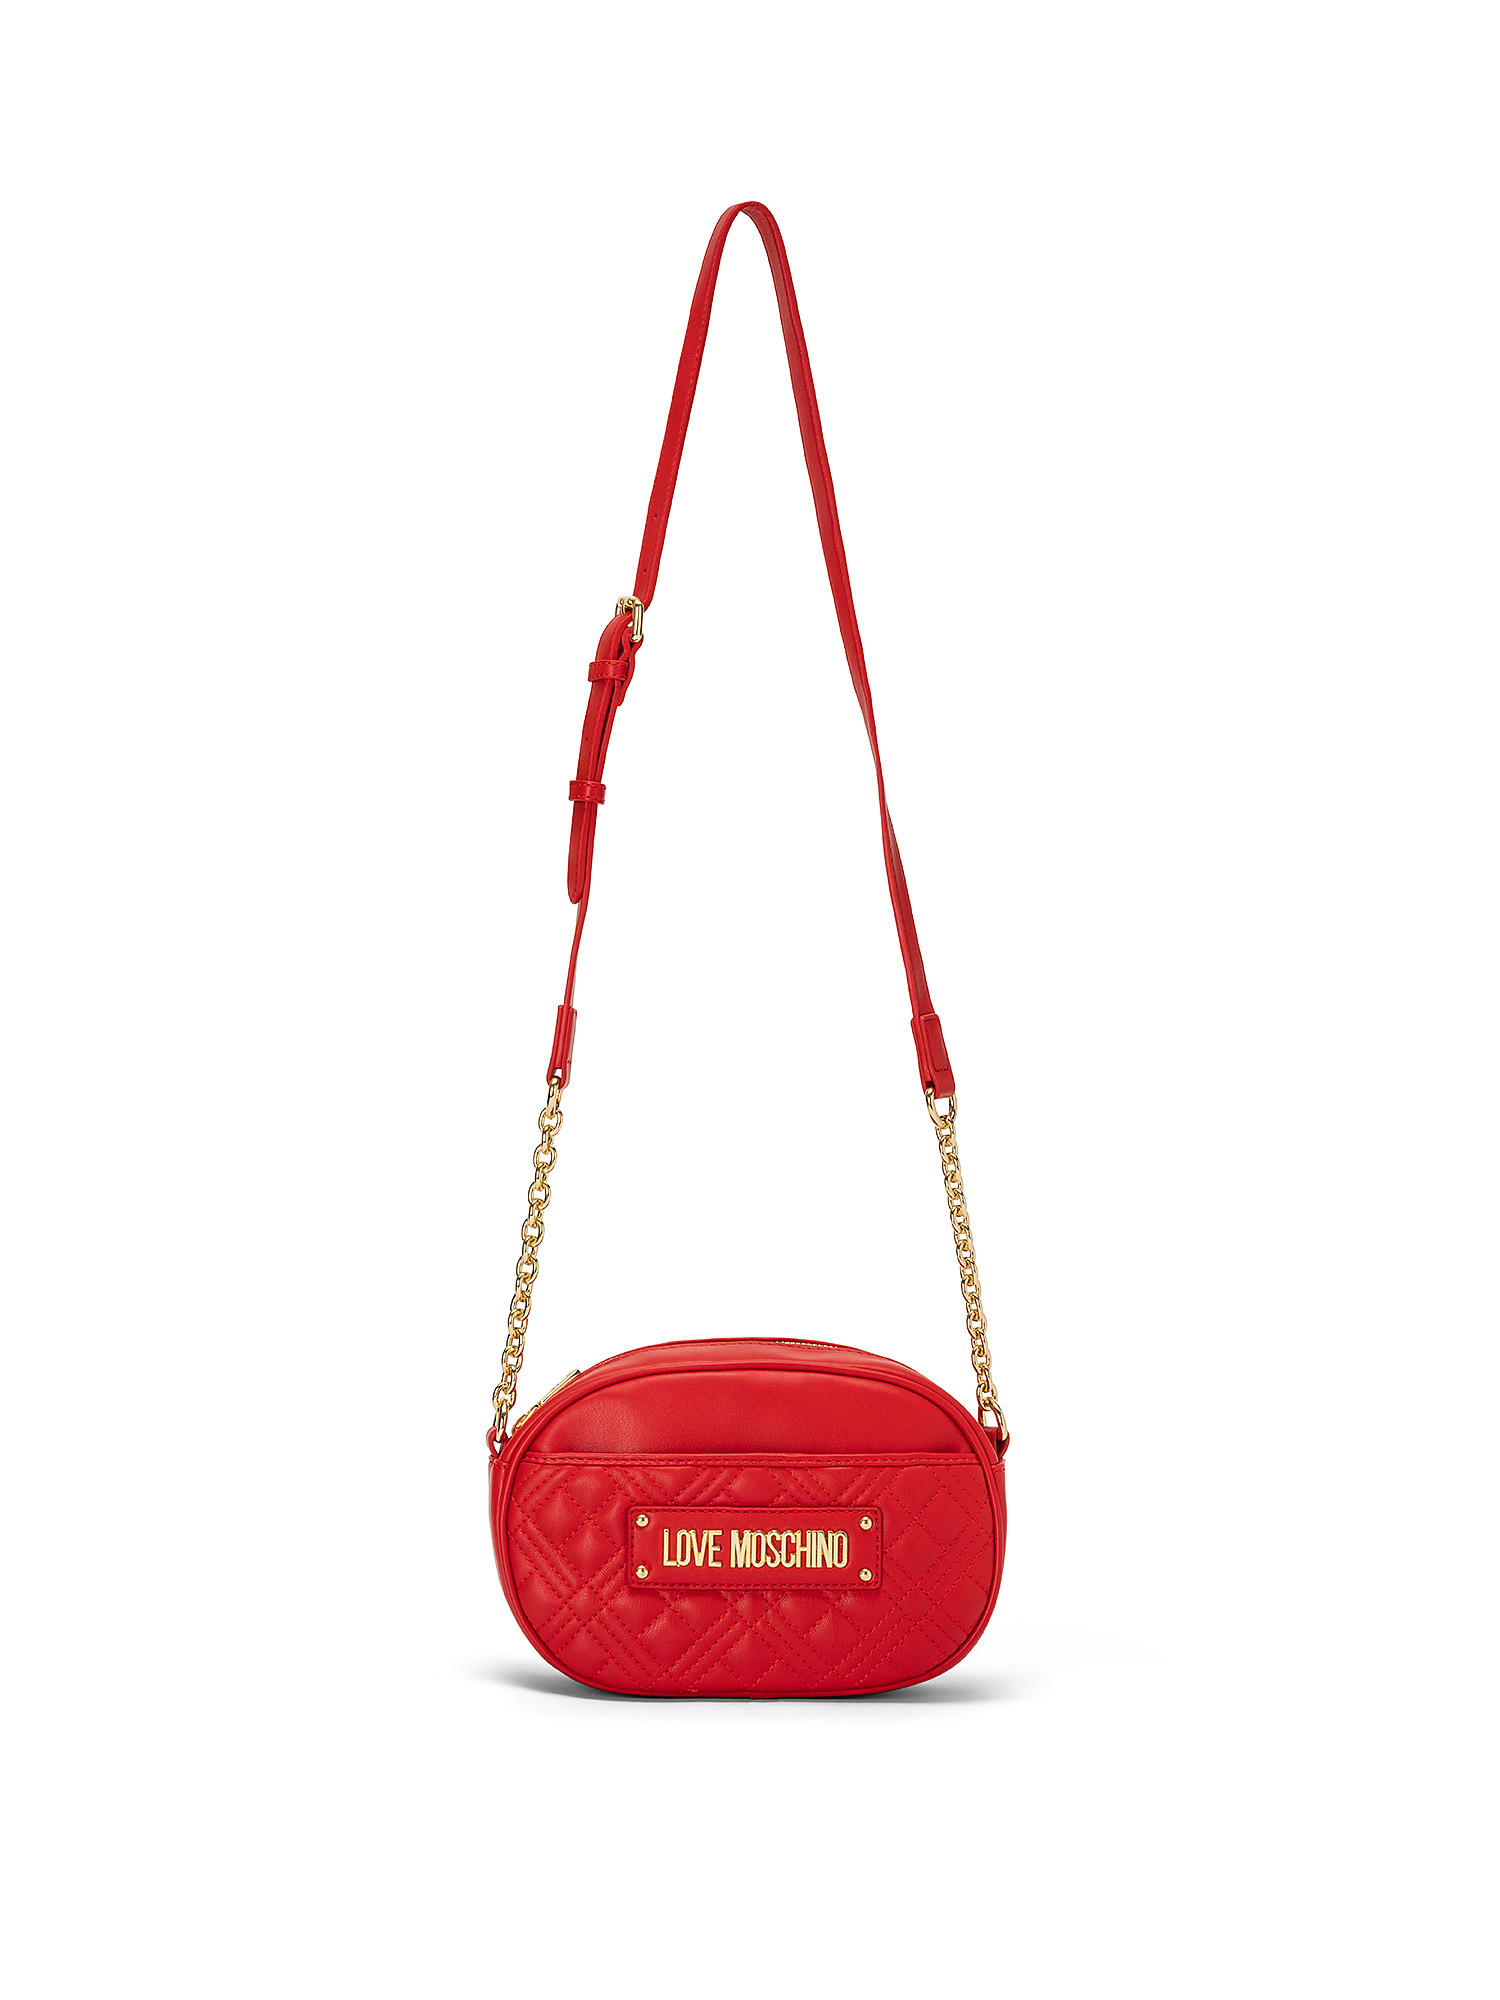 Borsa a tracolla con logo, Rosso, large image number 0